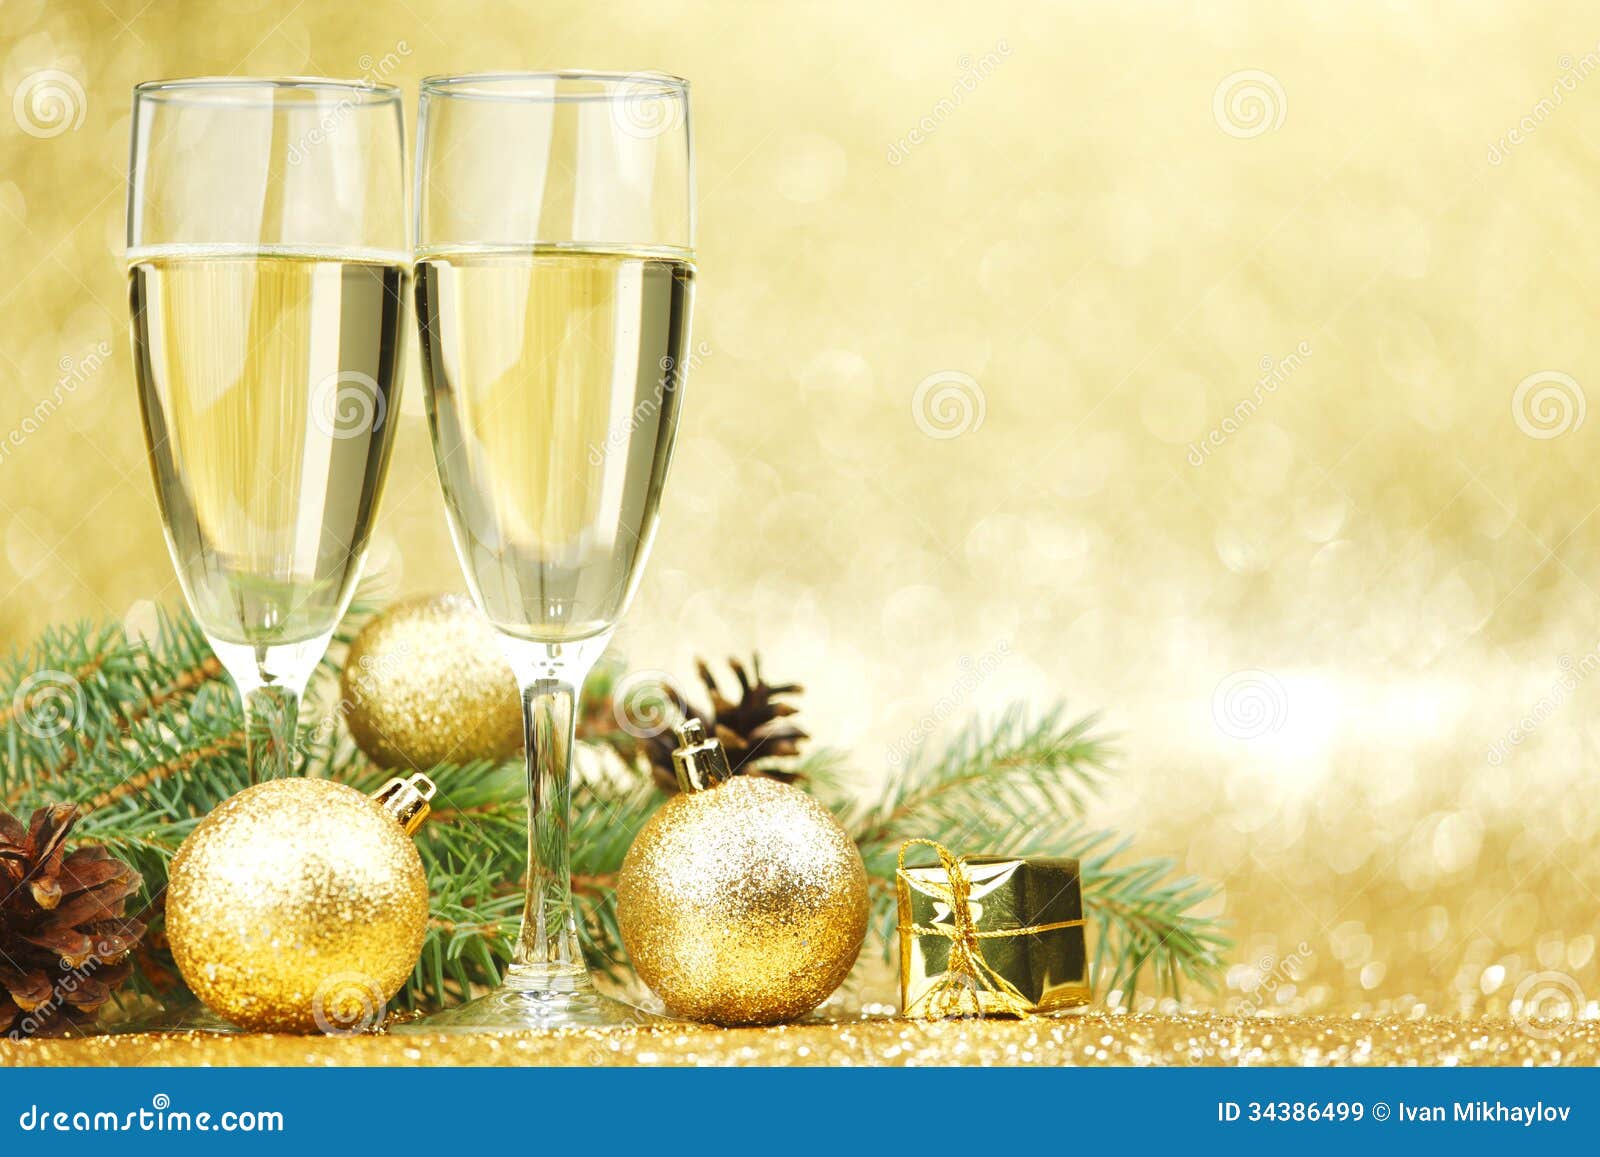 New year card stock image. Image of present, card, ball - 34386499